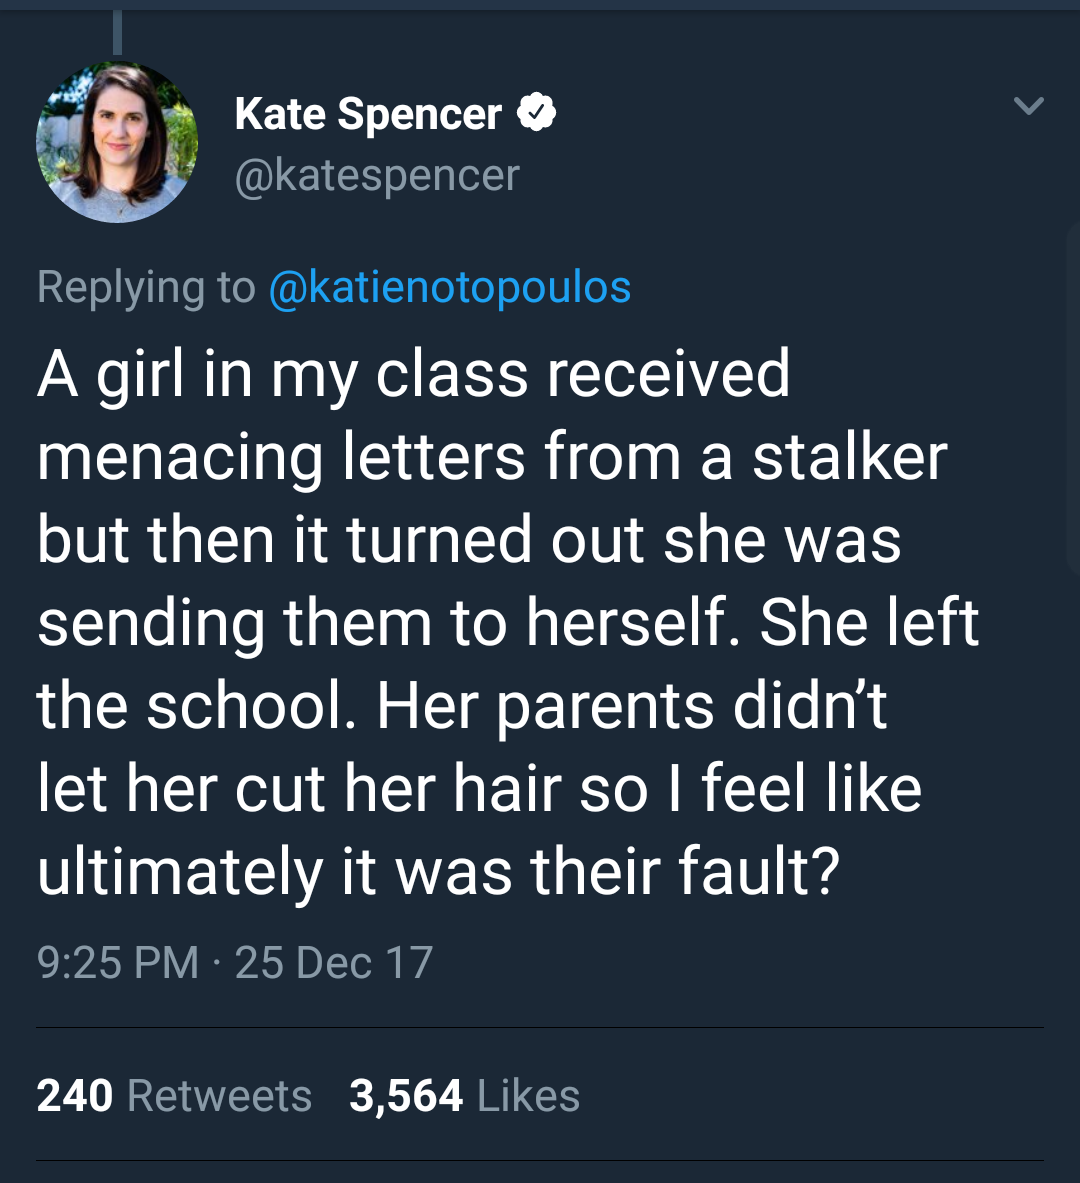 angle - Kate Spencer A girl in my class received menacing letters from a stalker but then it turned out she was sending them to herself. She left the school. Her parents didn't let her cut her hair so I feel ultimately it was their fault? 25 Dec 17 240 3,